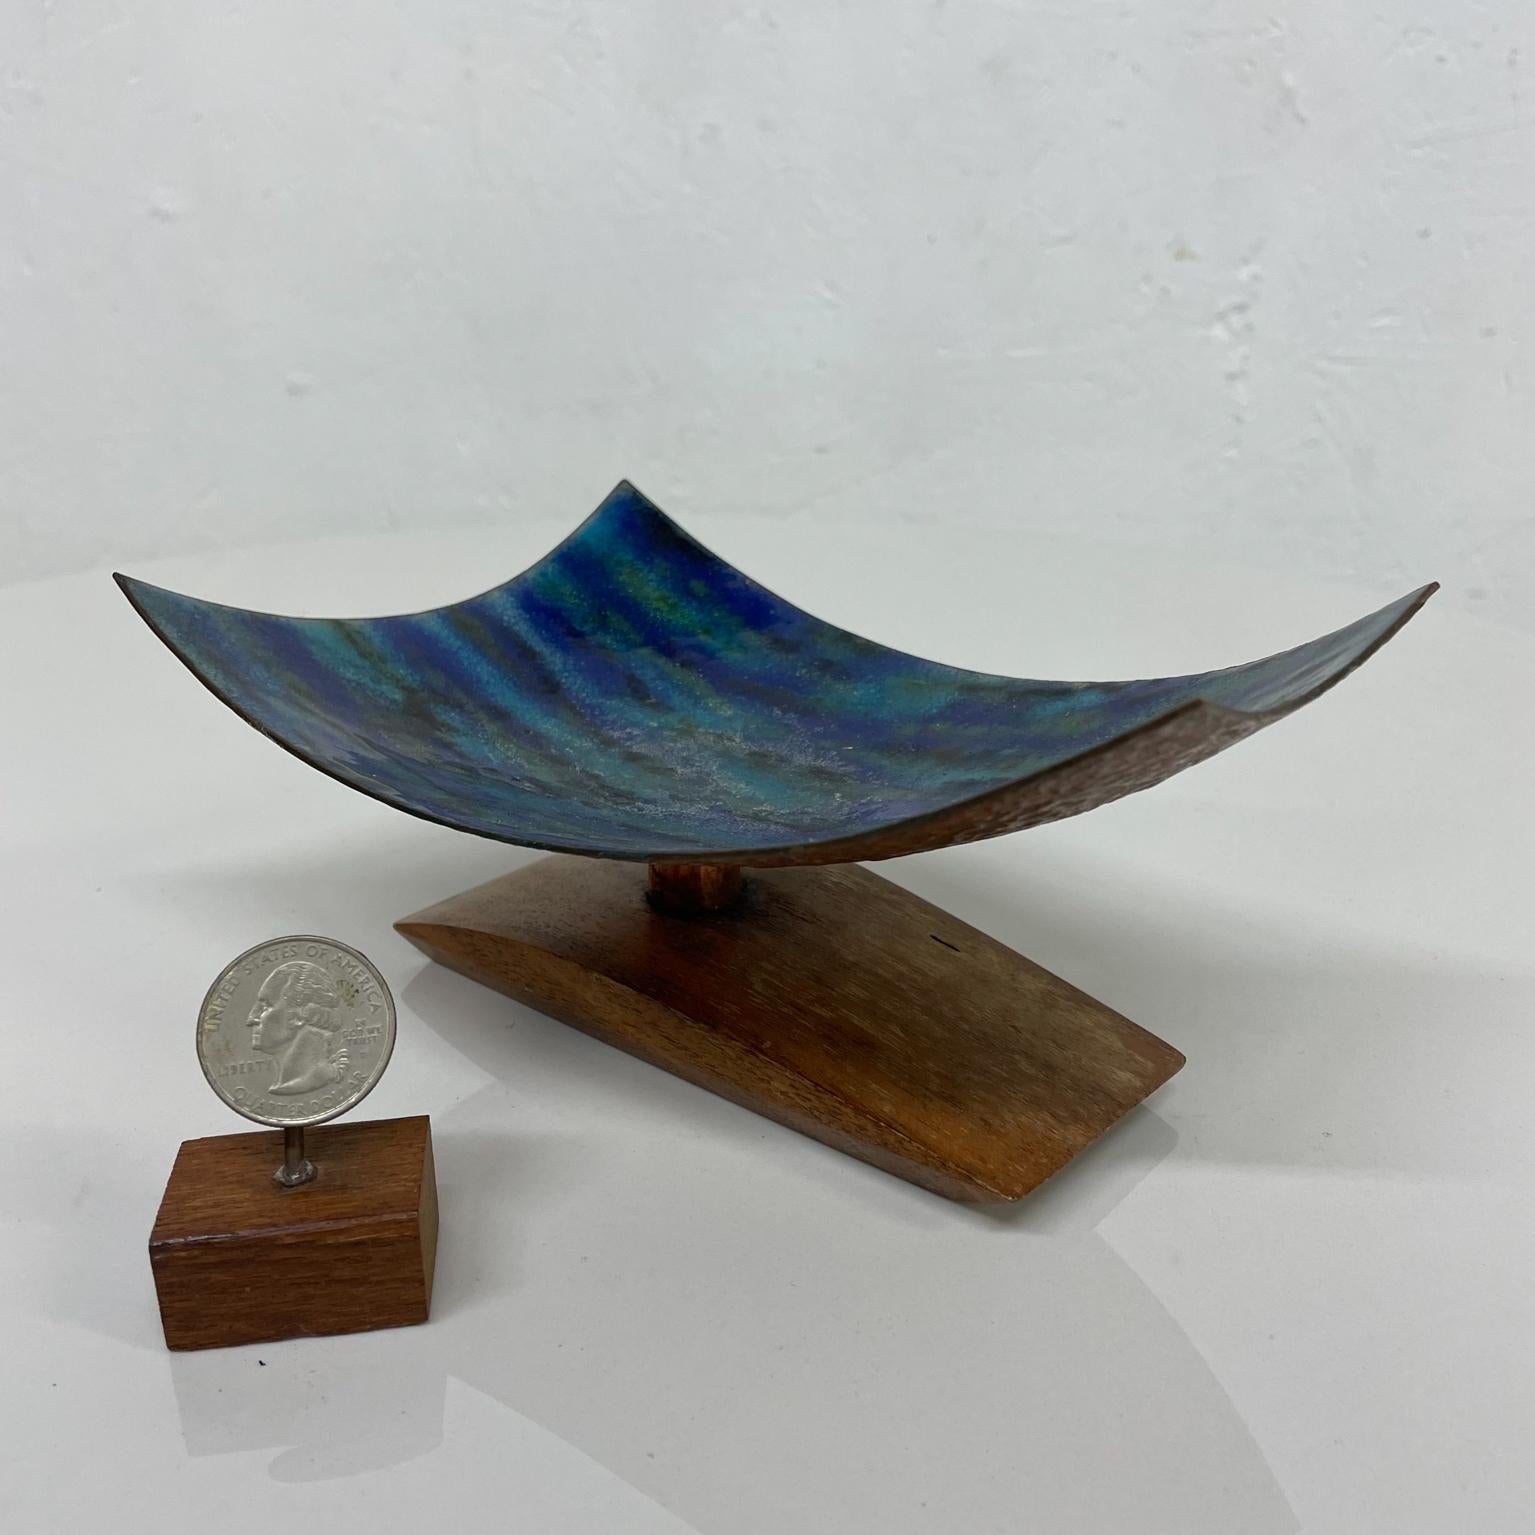 Sculpture
Decorative Sculpture blue with modern curved lines. Mounted on Koa Wood.
7 long x 4.63w x 2.88
It can be used a dish or splendid as stand-alone sculpture.
No signature. 
Preowned original vintage condition.
See images please.

